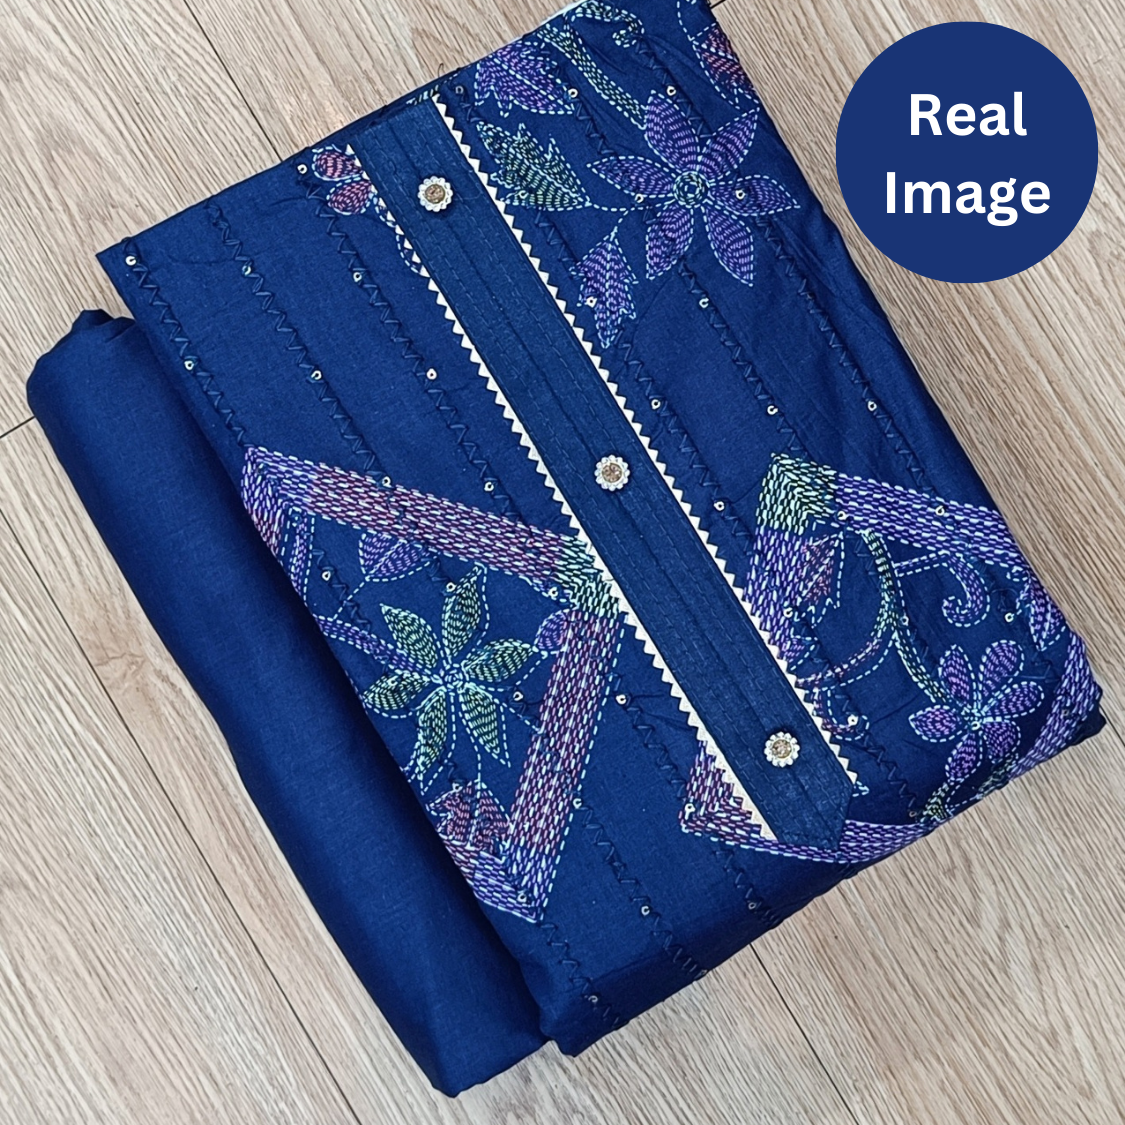 Navy Blue Cotton Printed Unstitched Dress Material for Women - Tanu Shop India